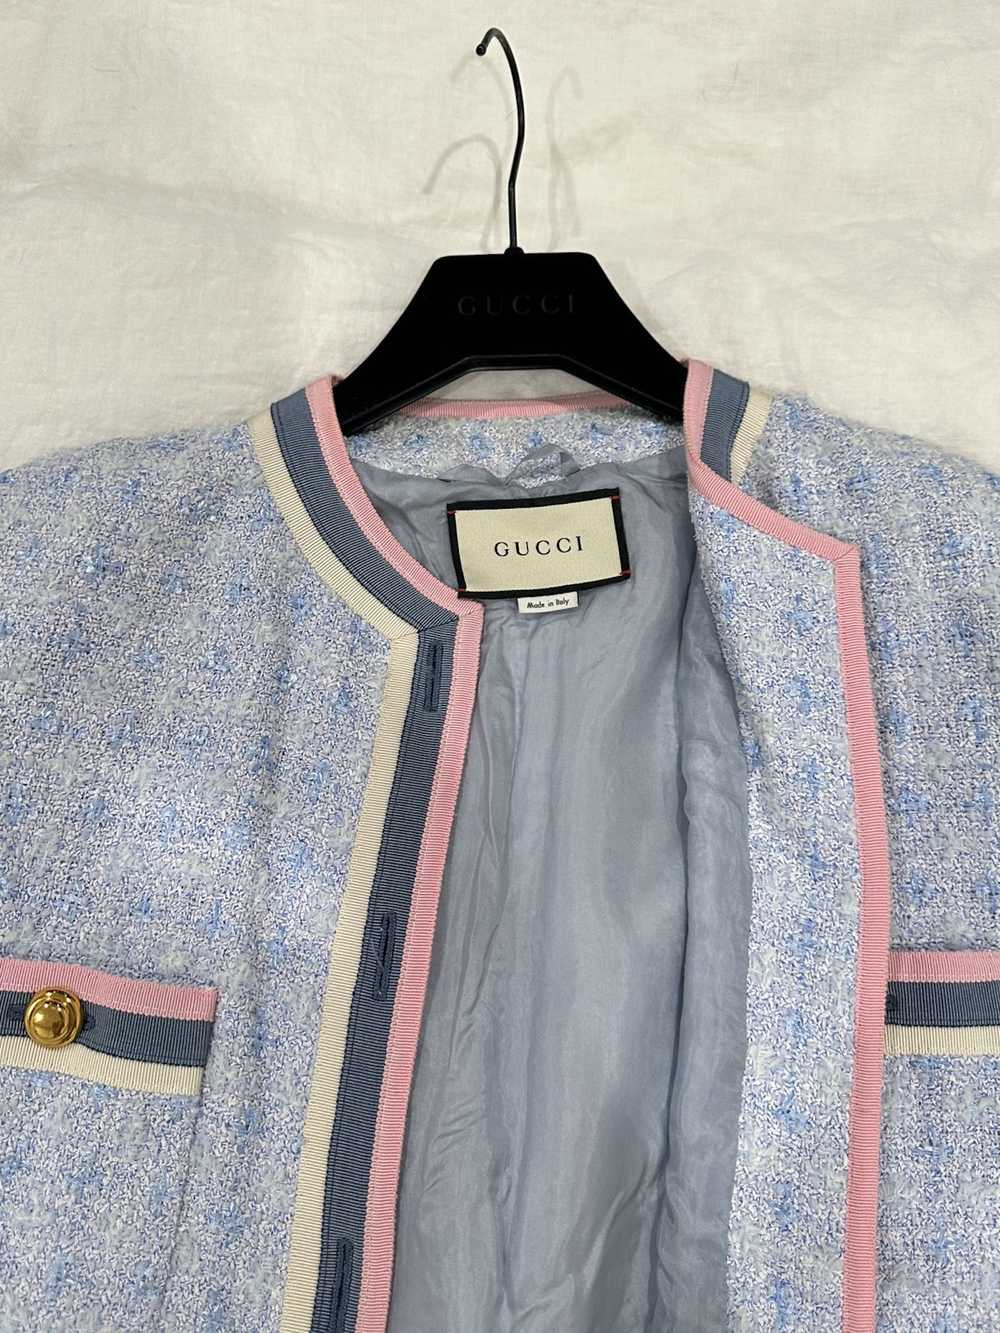 Gucci Gucci Tweed Jacket in Light Blue - image 4